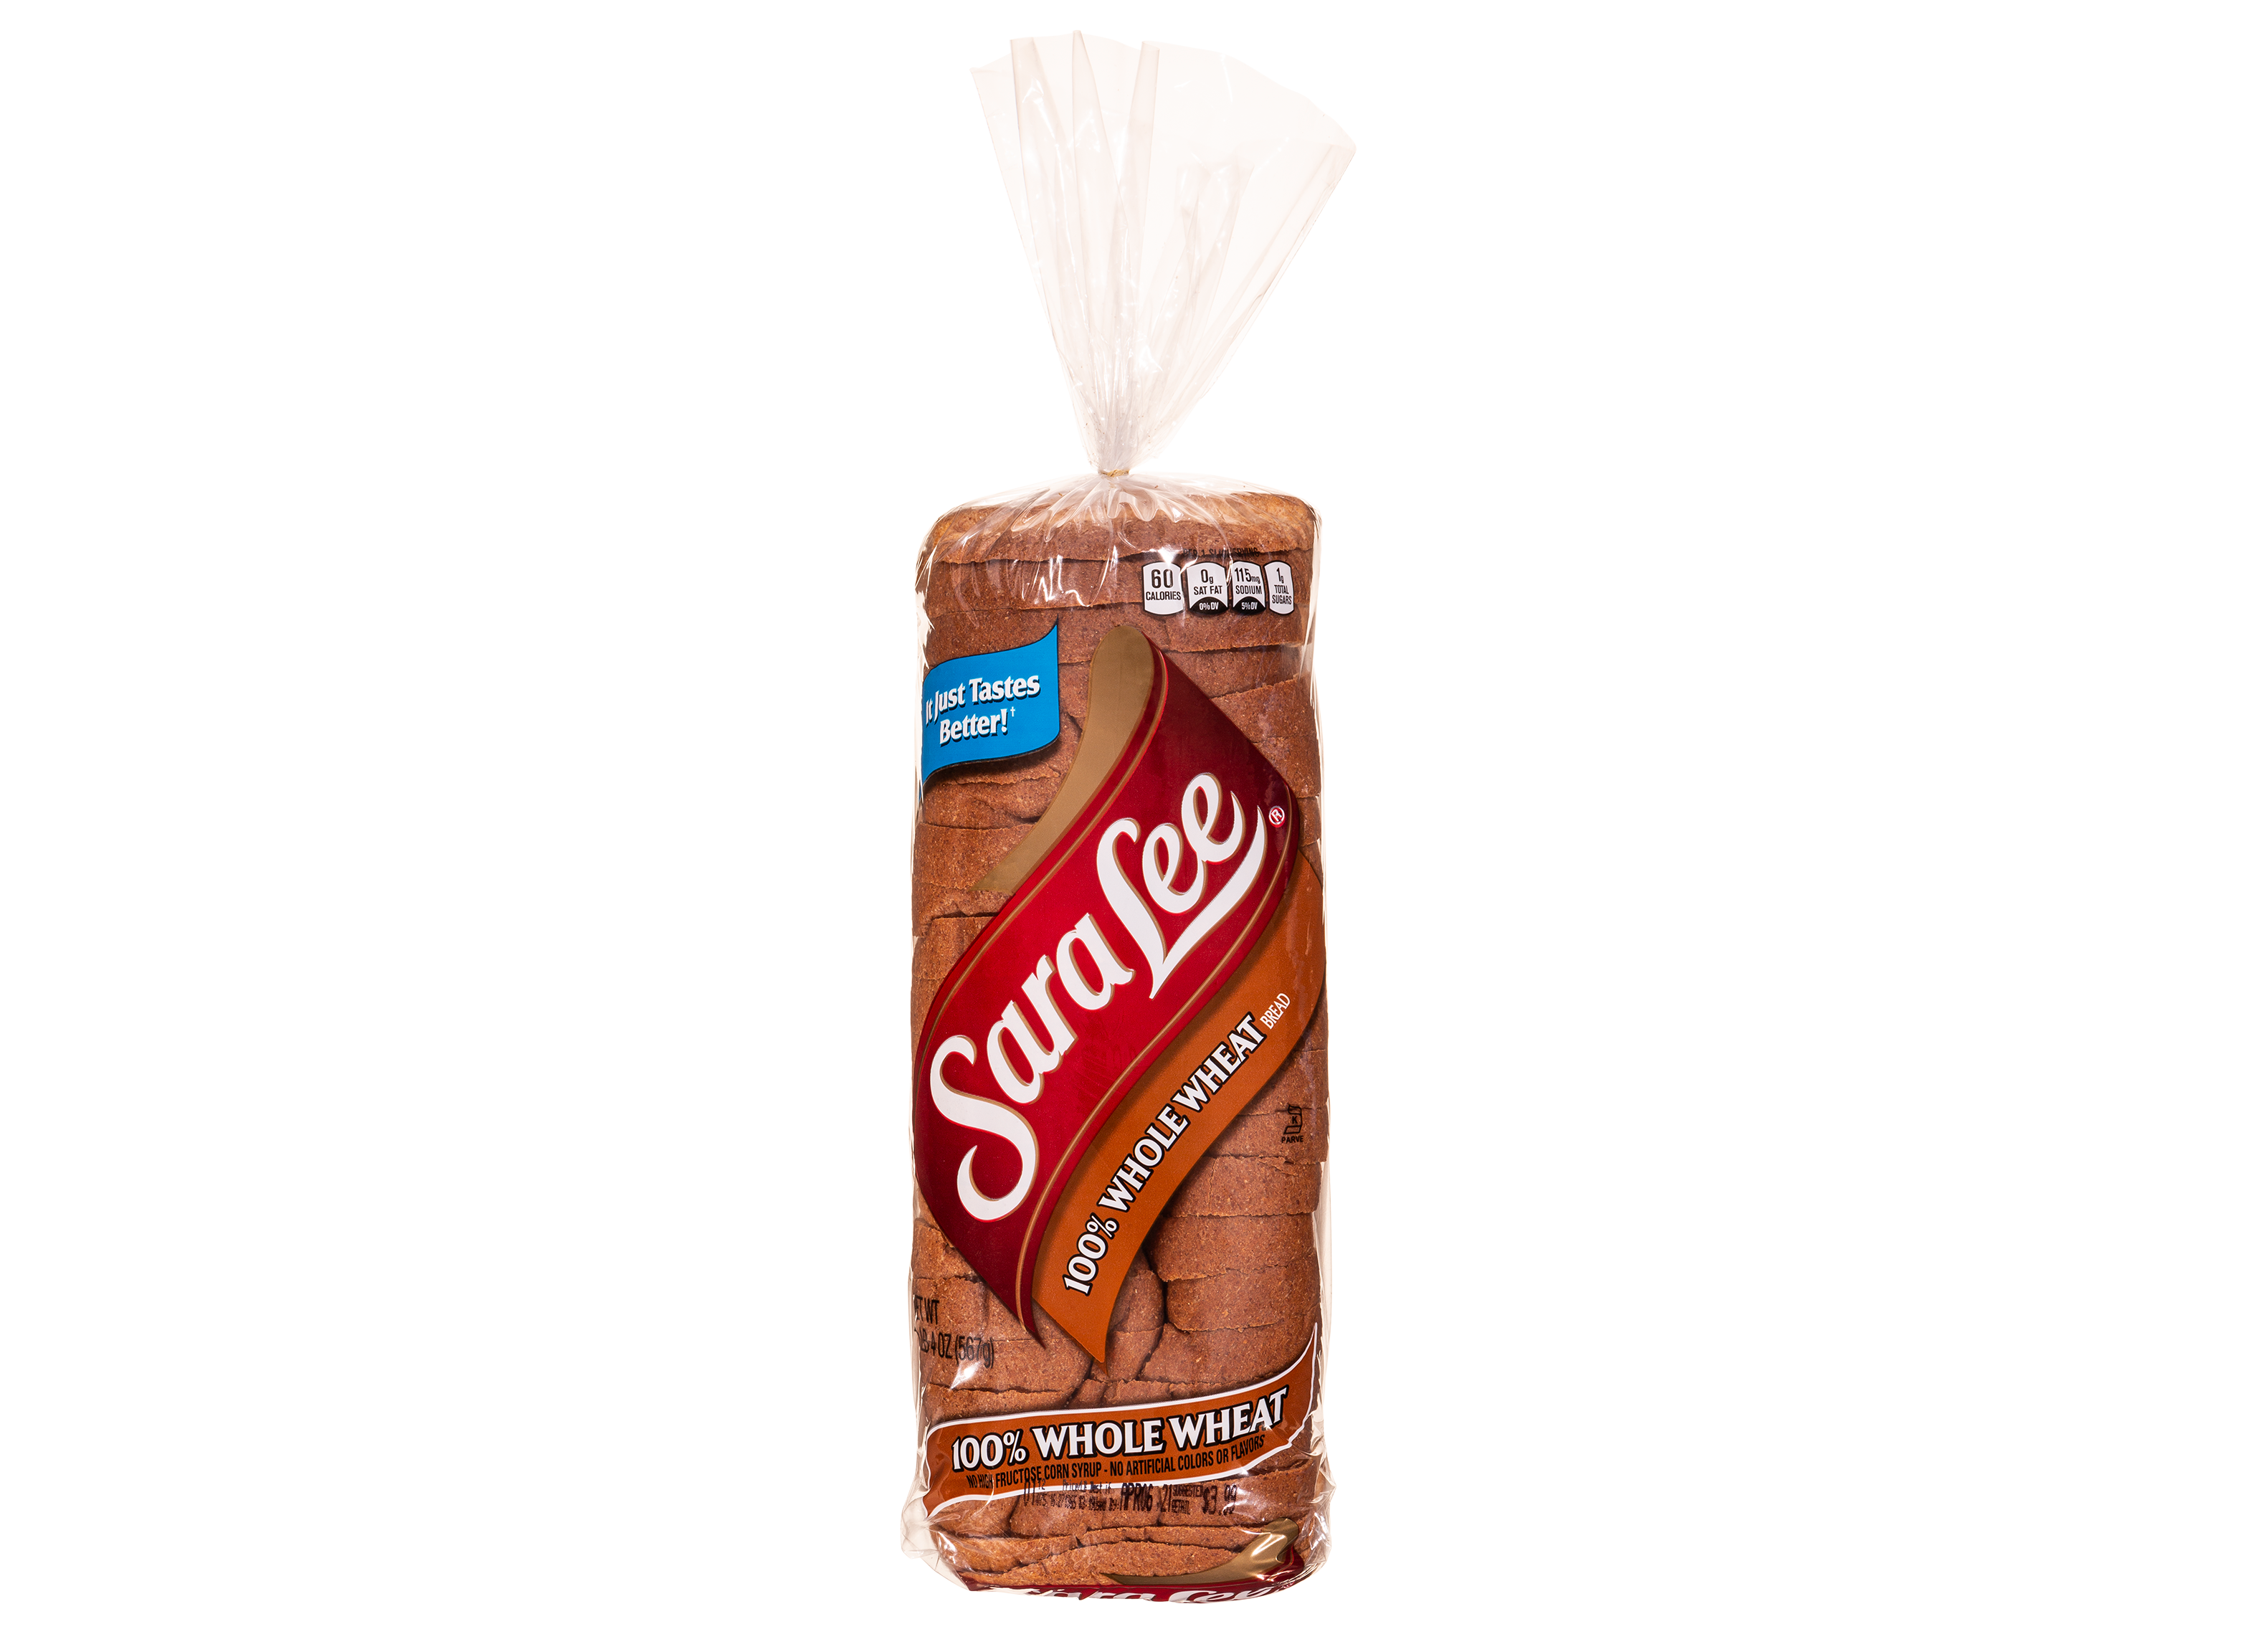 Sara Lee 100% Whole Wheat Bread Review - Consumer Reports